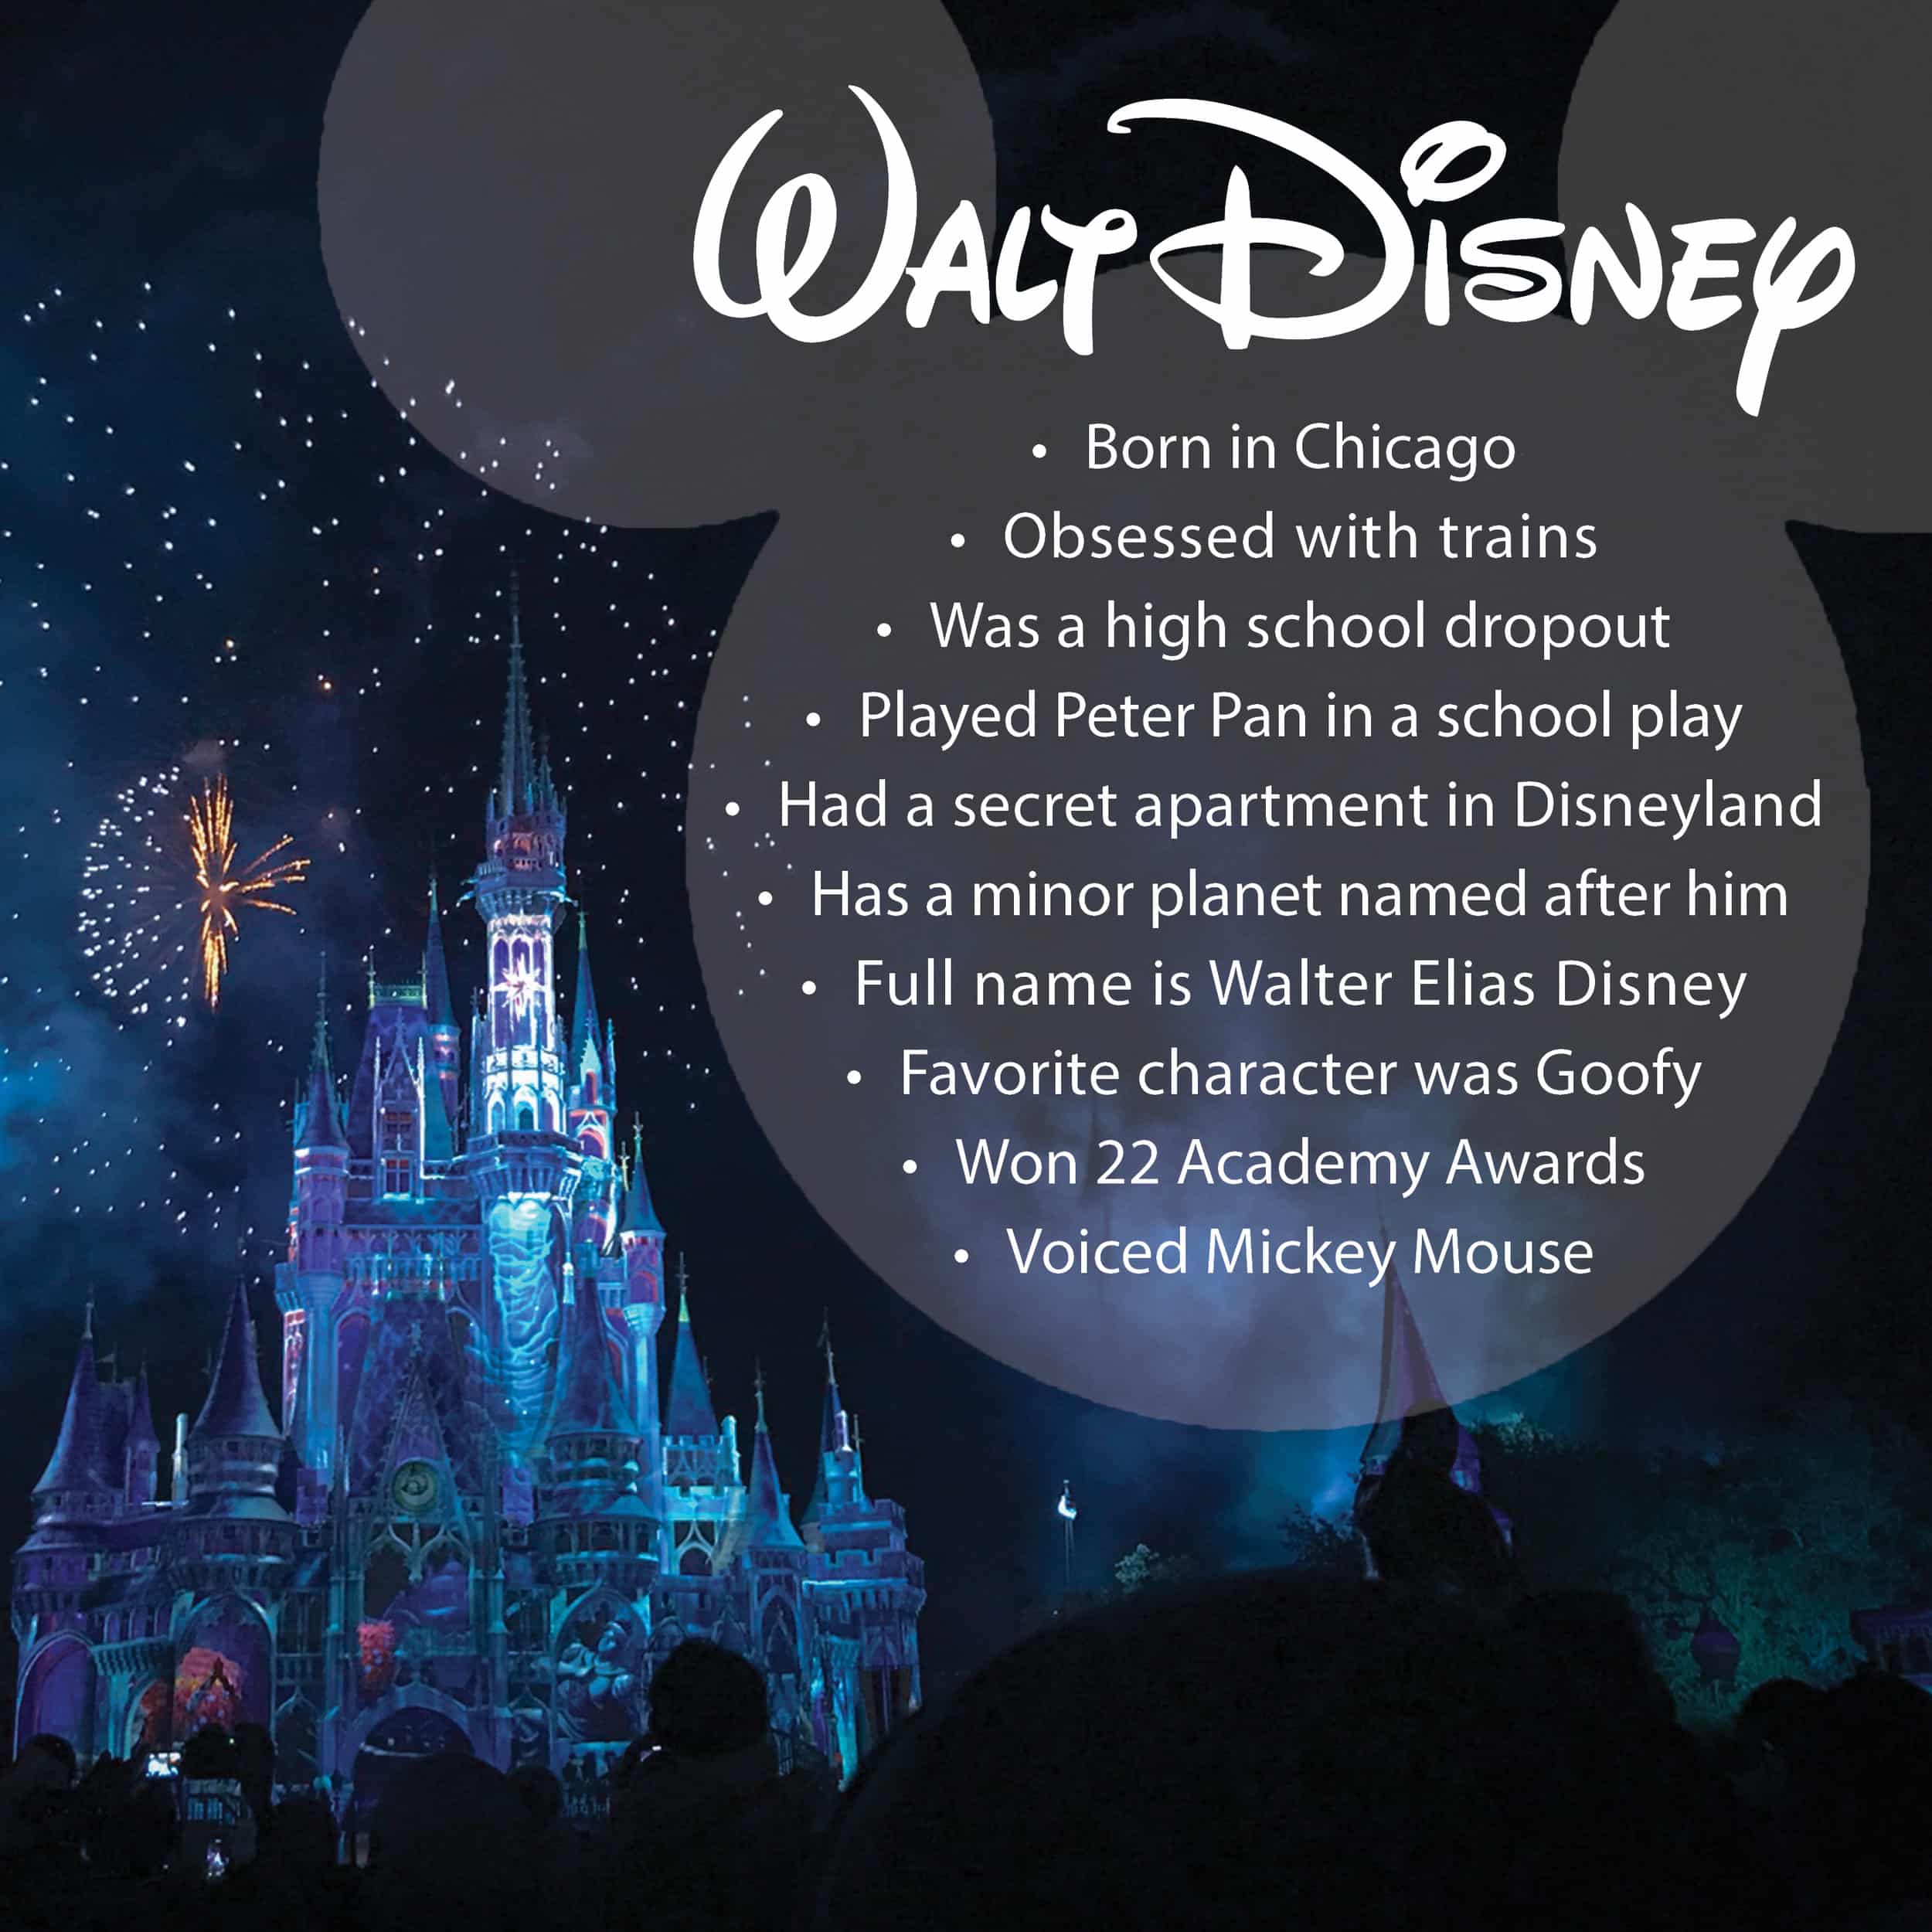 Facts about the wonderful Walt Disney.